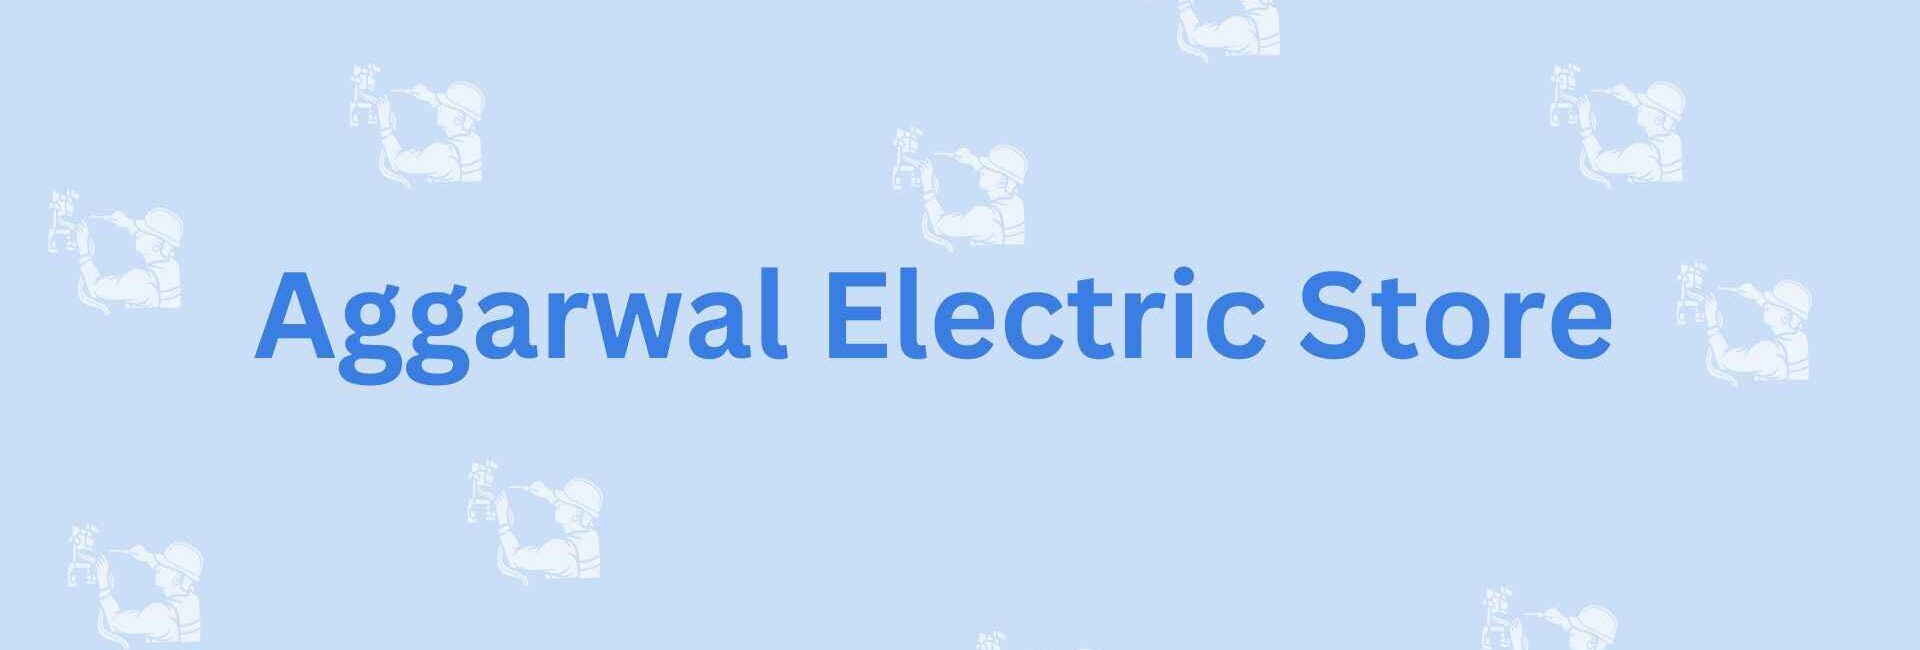 Aggarwal Electric Store- Electrician In Noida